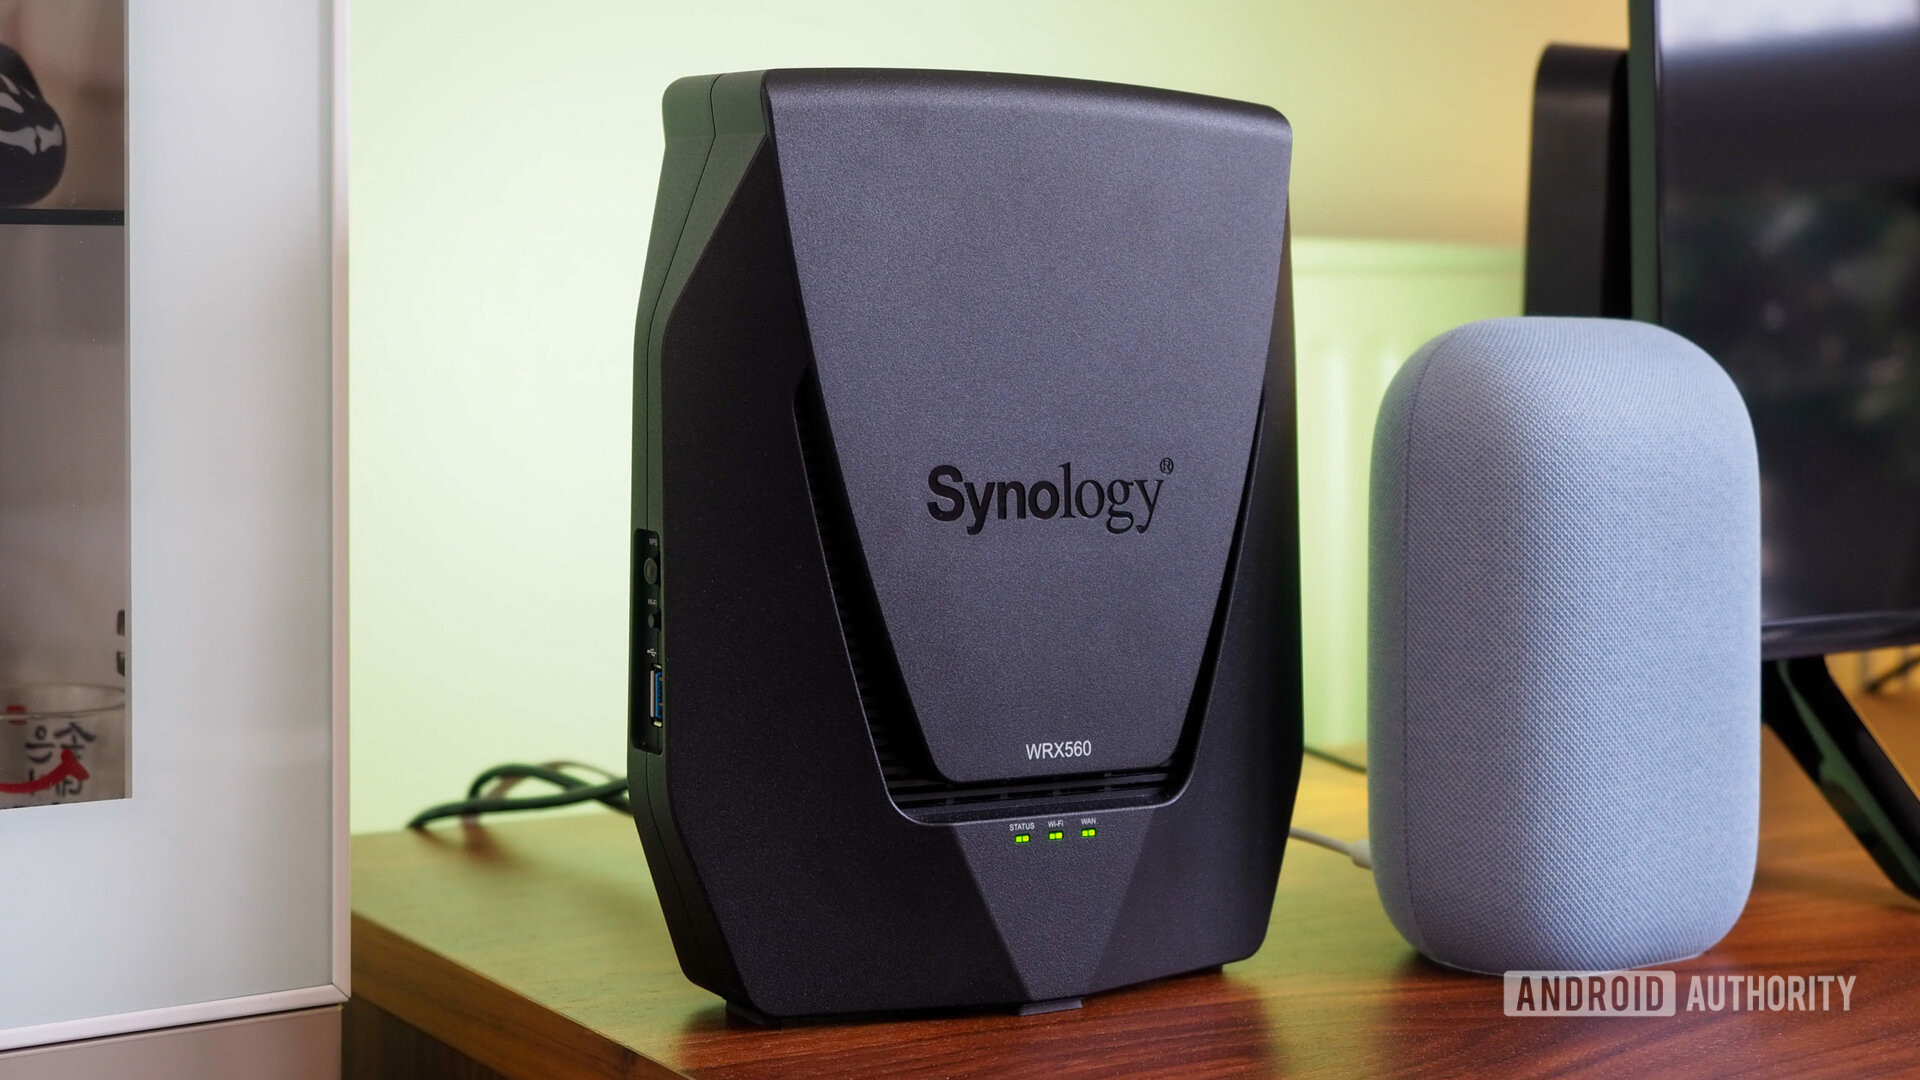 Synology WRX560 router next to a Google Nest Audio with a green light in the background